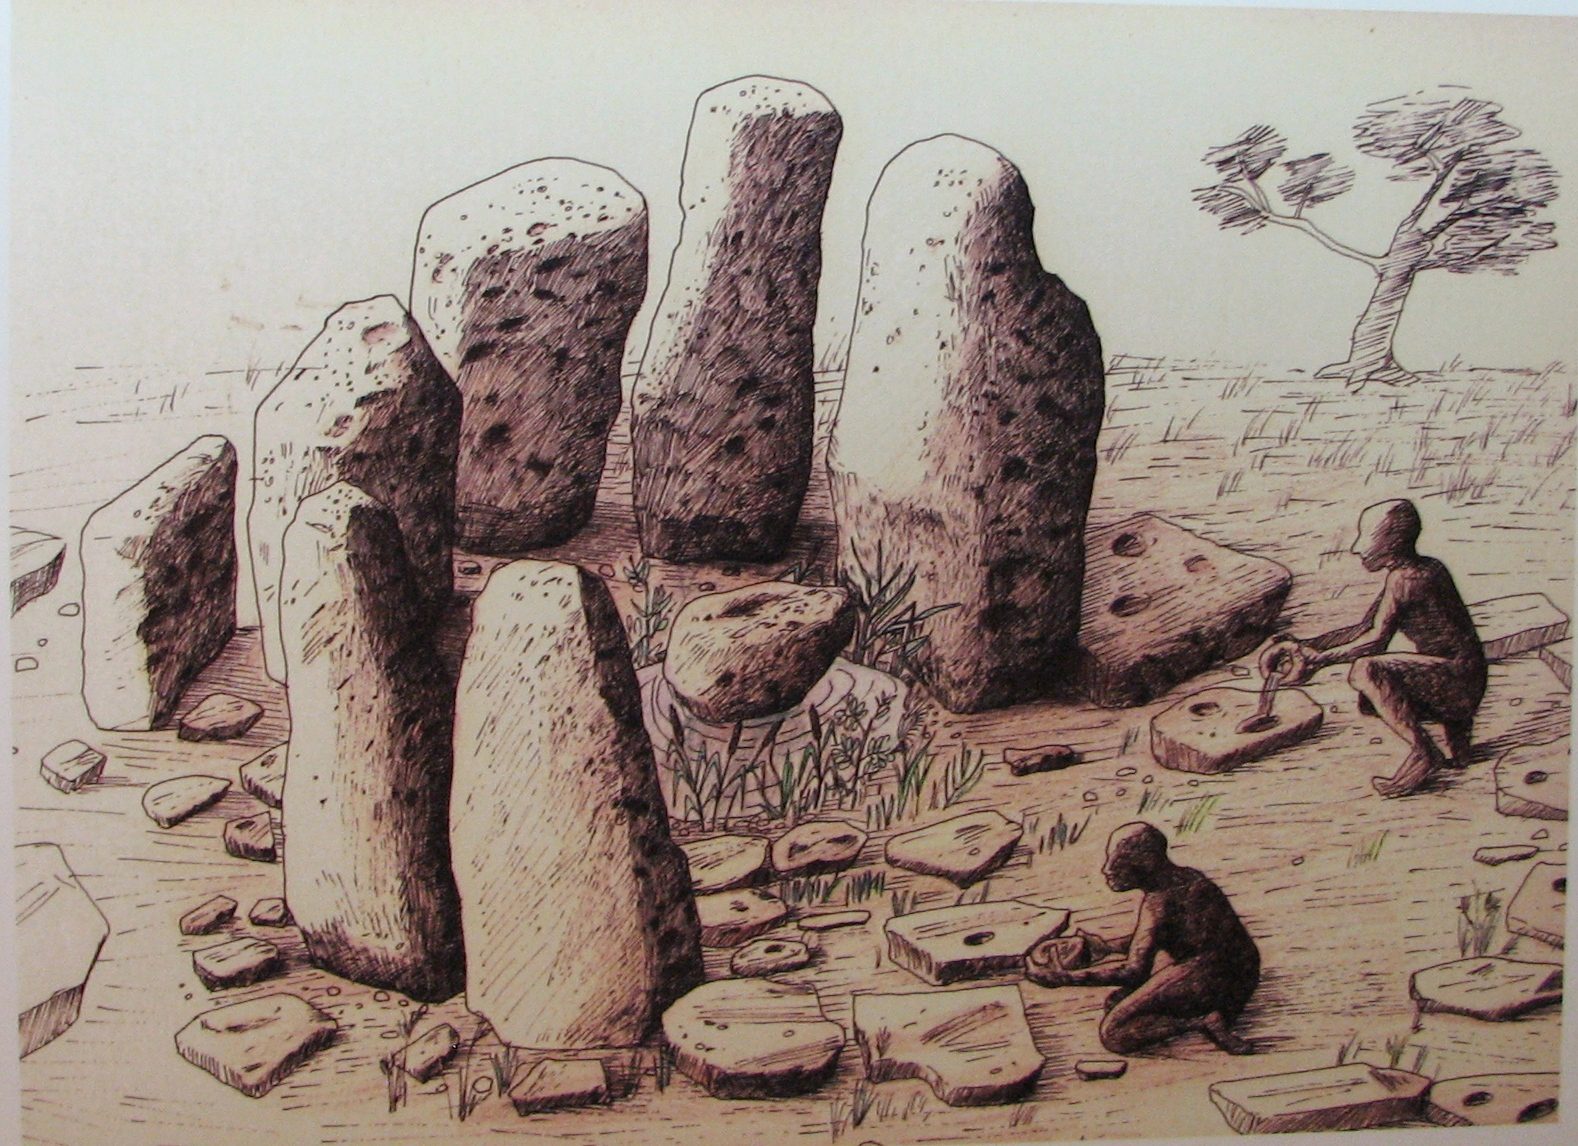 drawing of stone monoliths